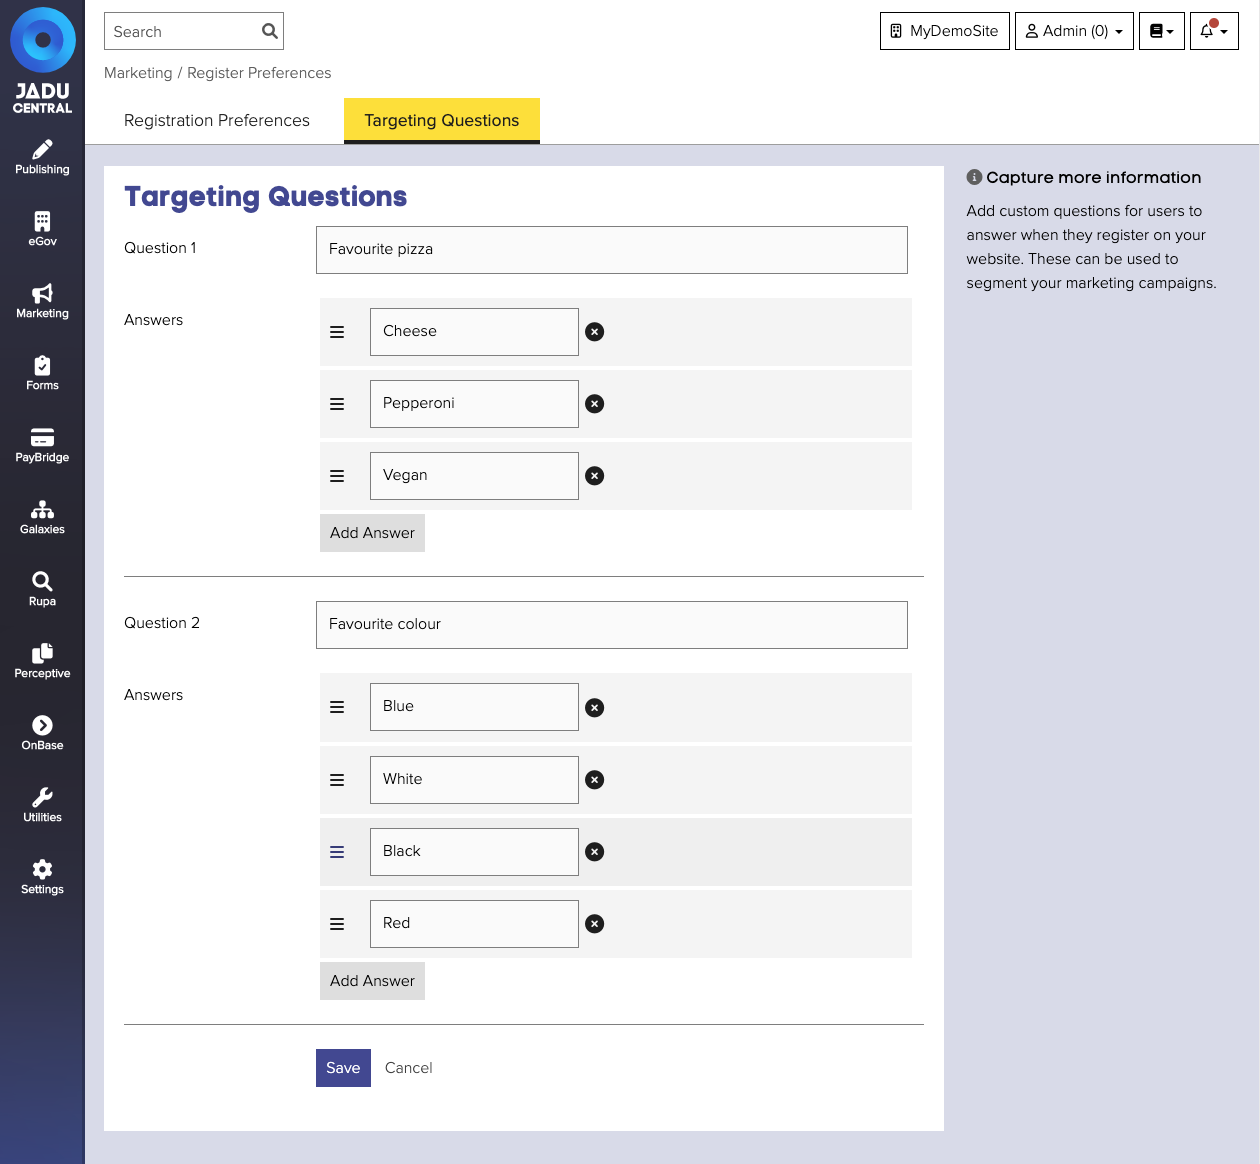 Targeting questions page